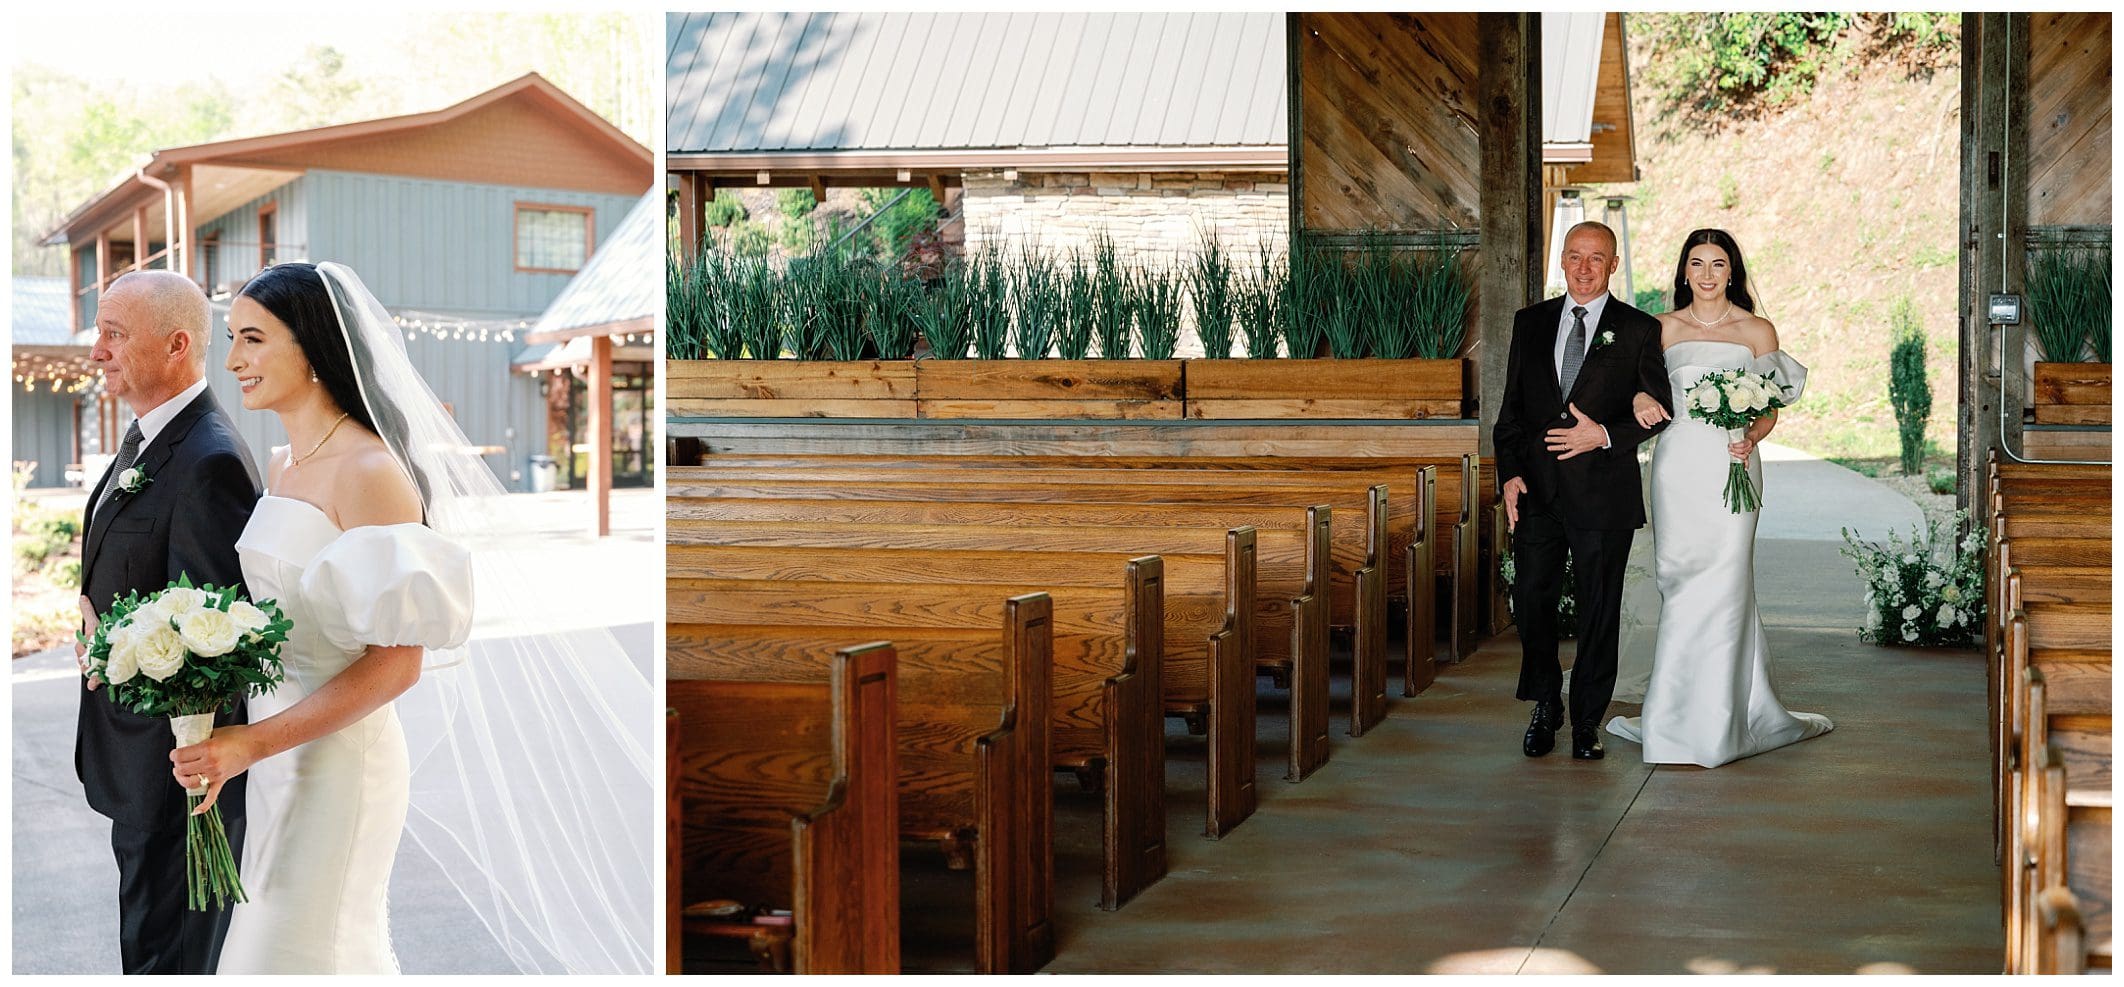 A bride in a white dress walks down the aisle with her father, flanked by wooden benches, in a rustic outdoor wedding setting.